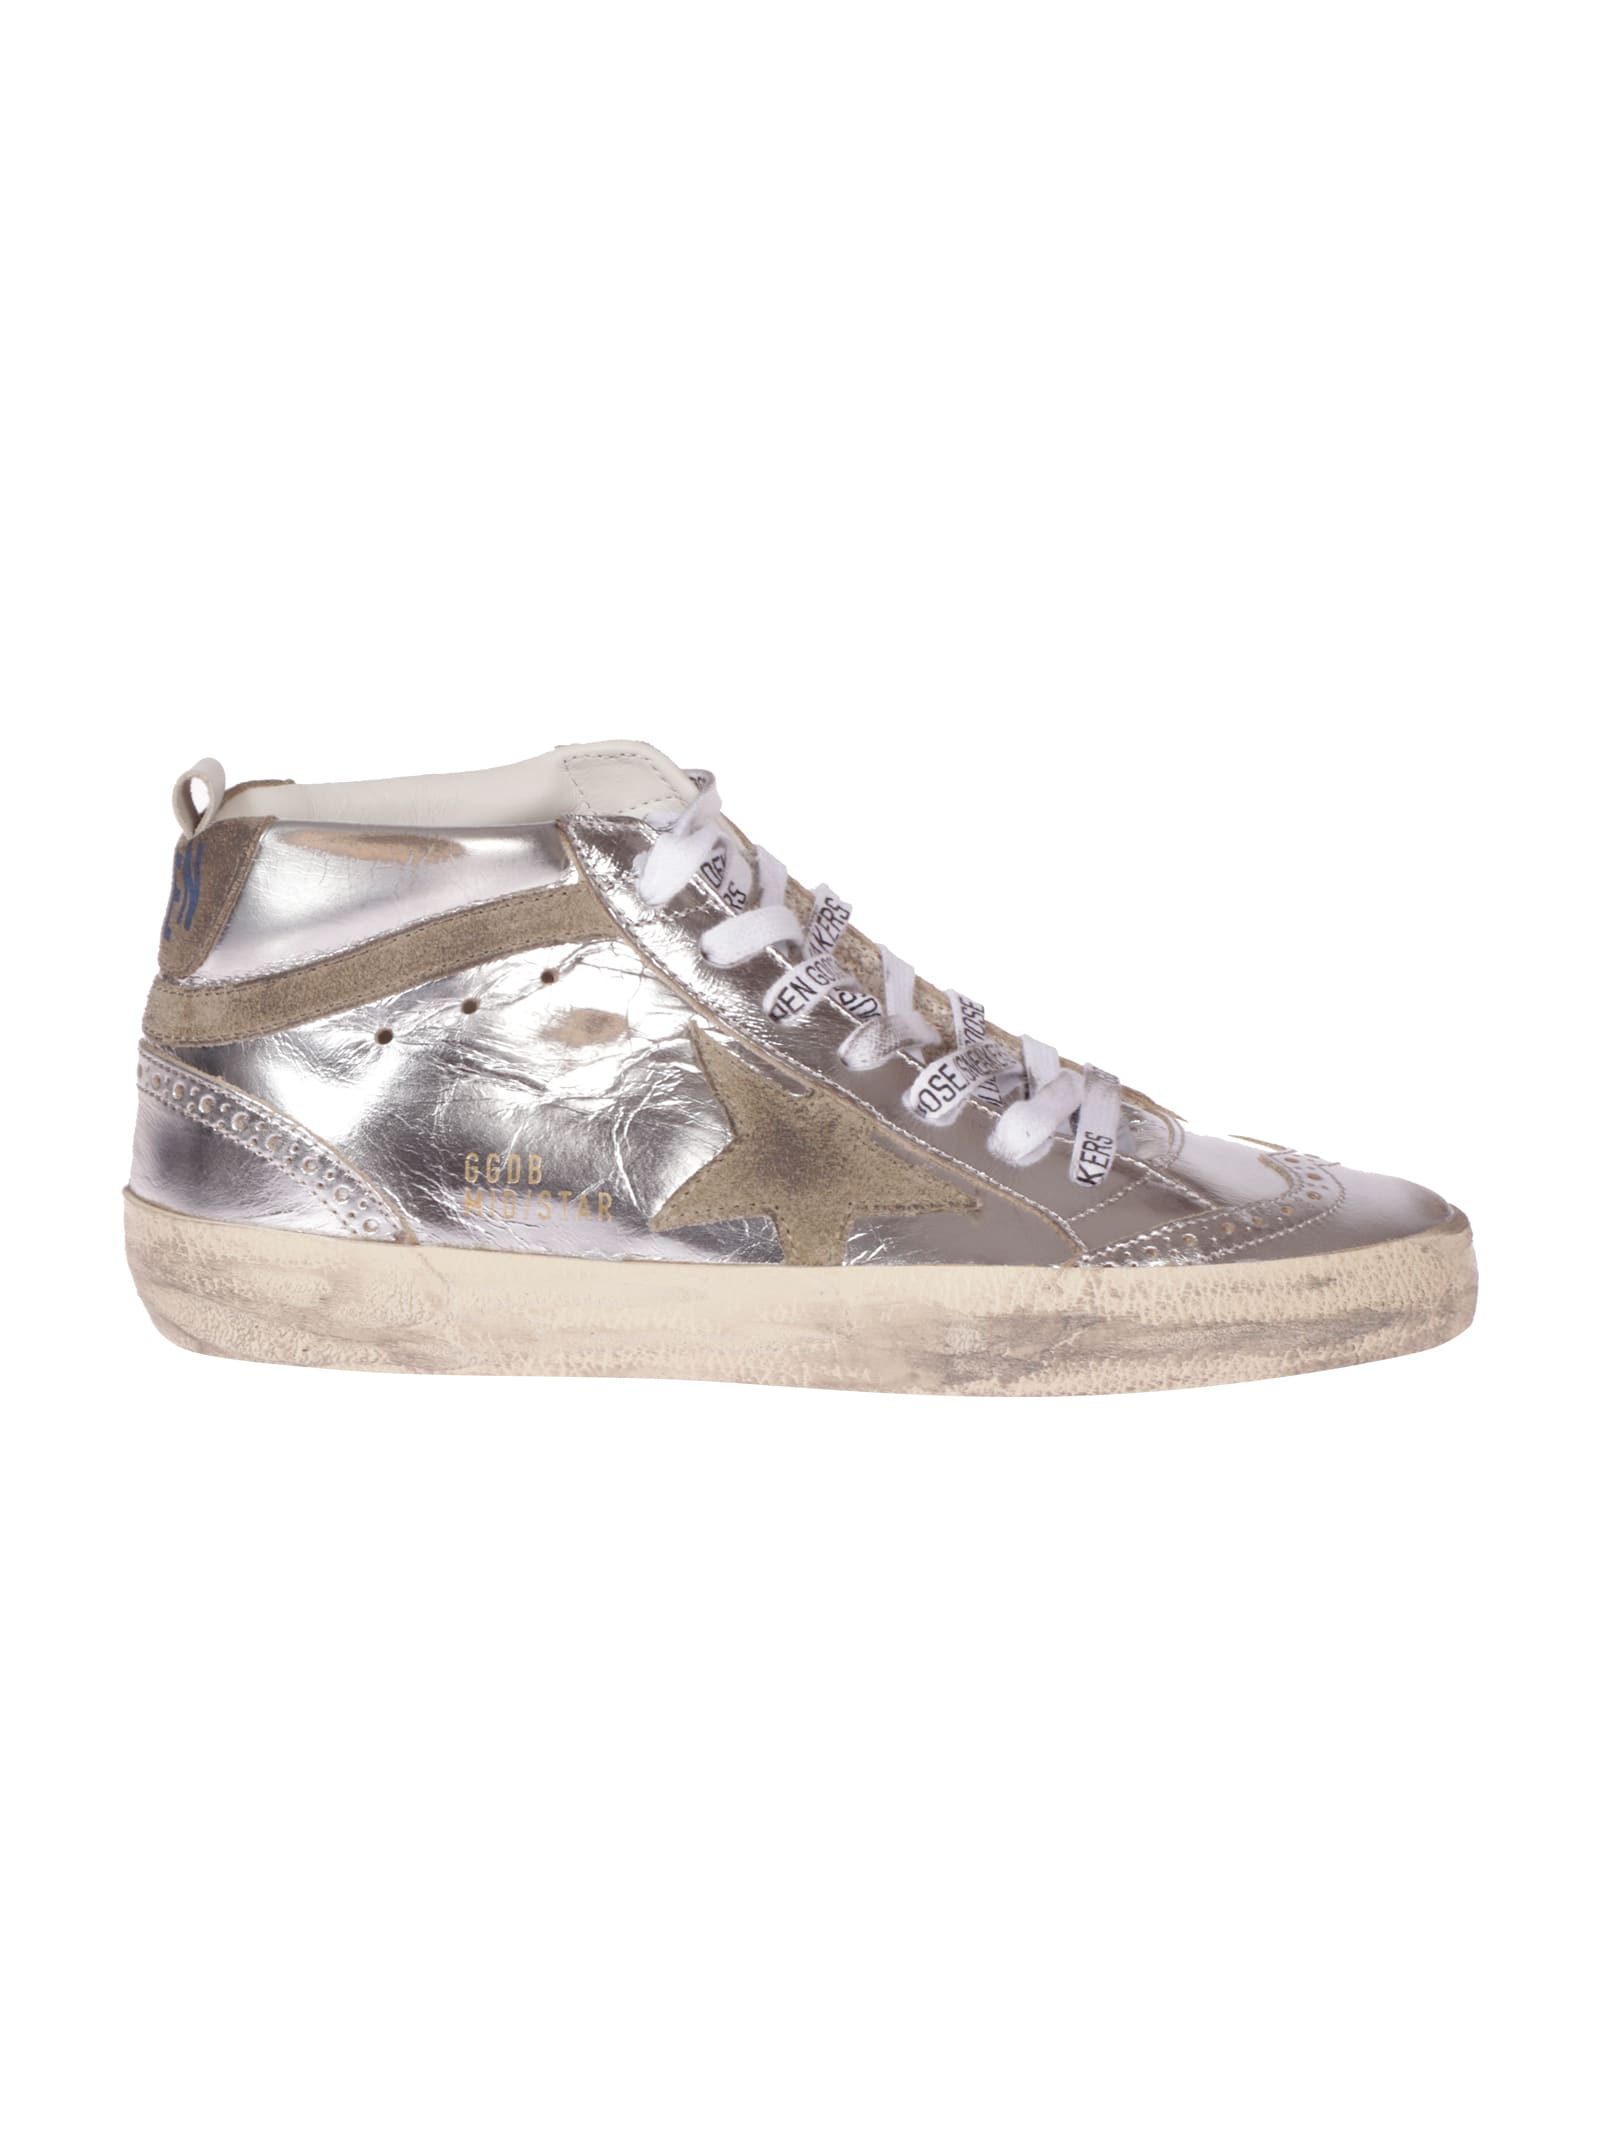 Golden Goose Mid Star Laminated Upper And Spur Suede Star